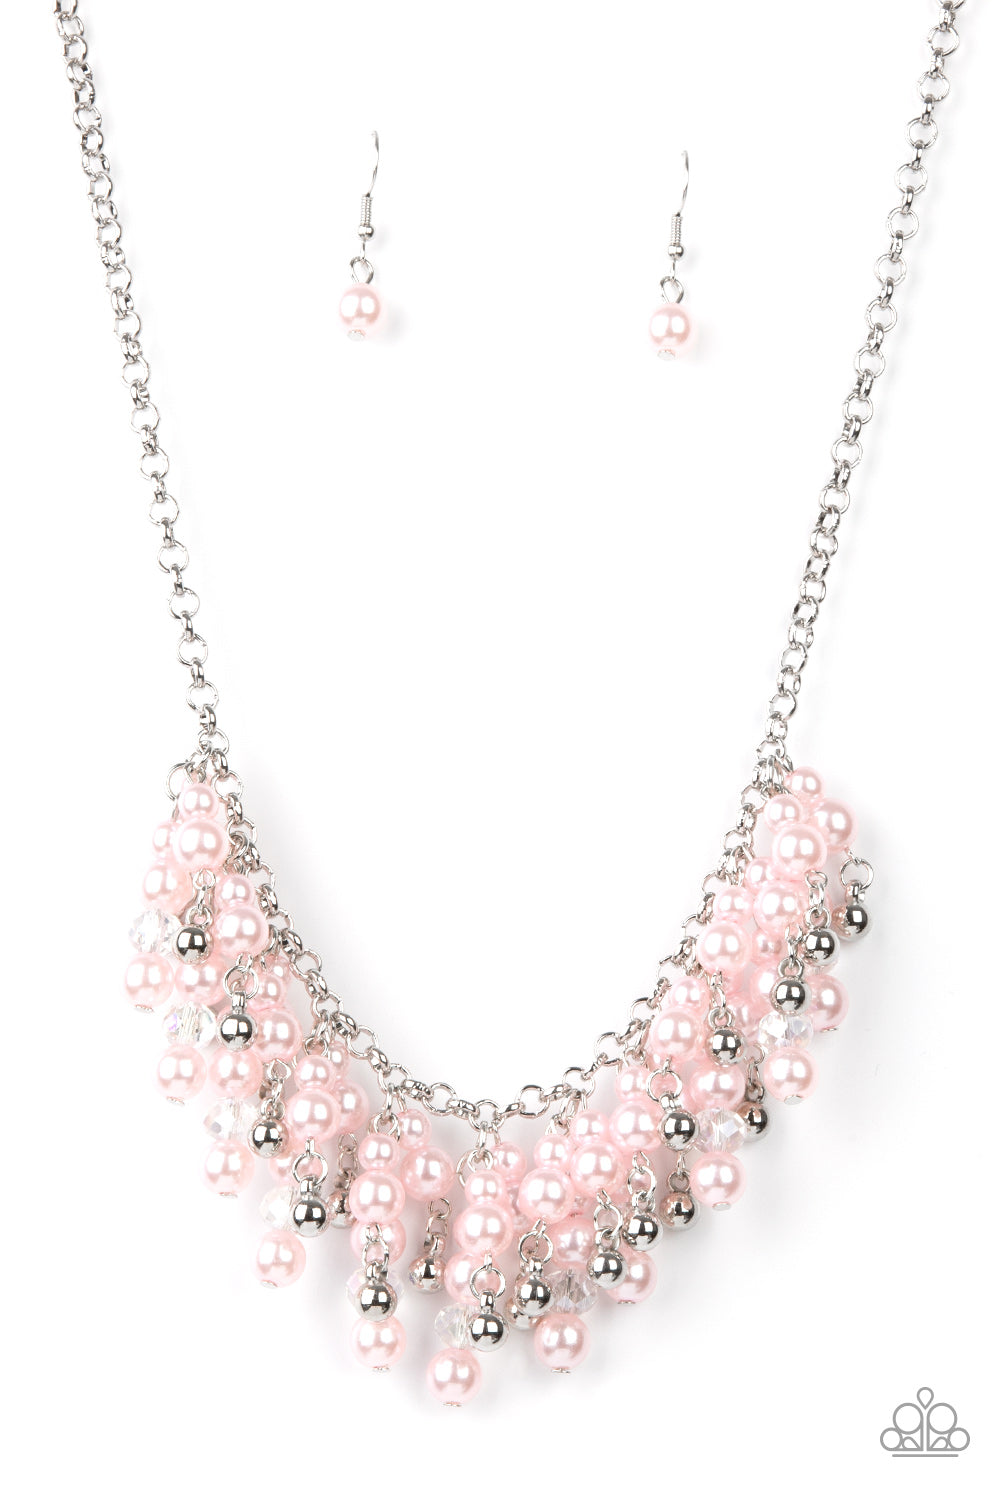 Champagne Dreams - pink - Paparazzi necklace